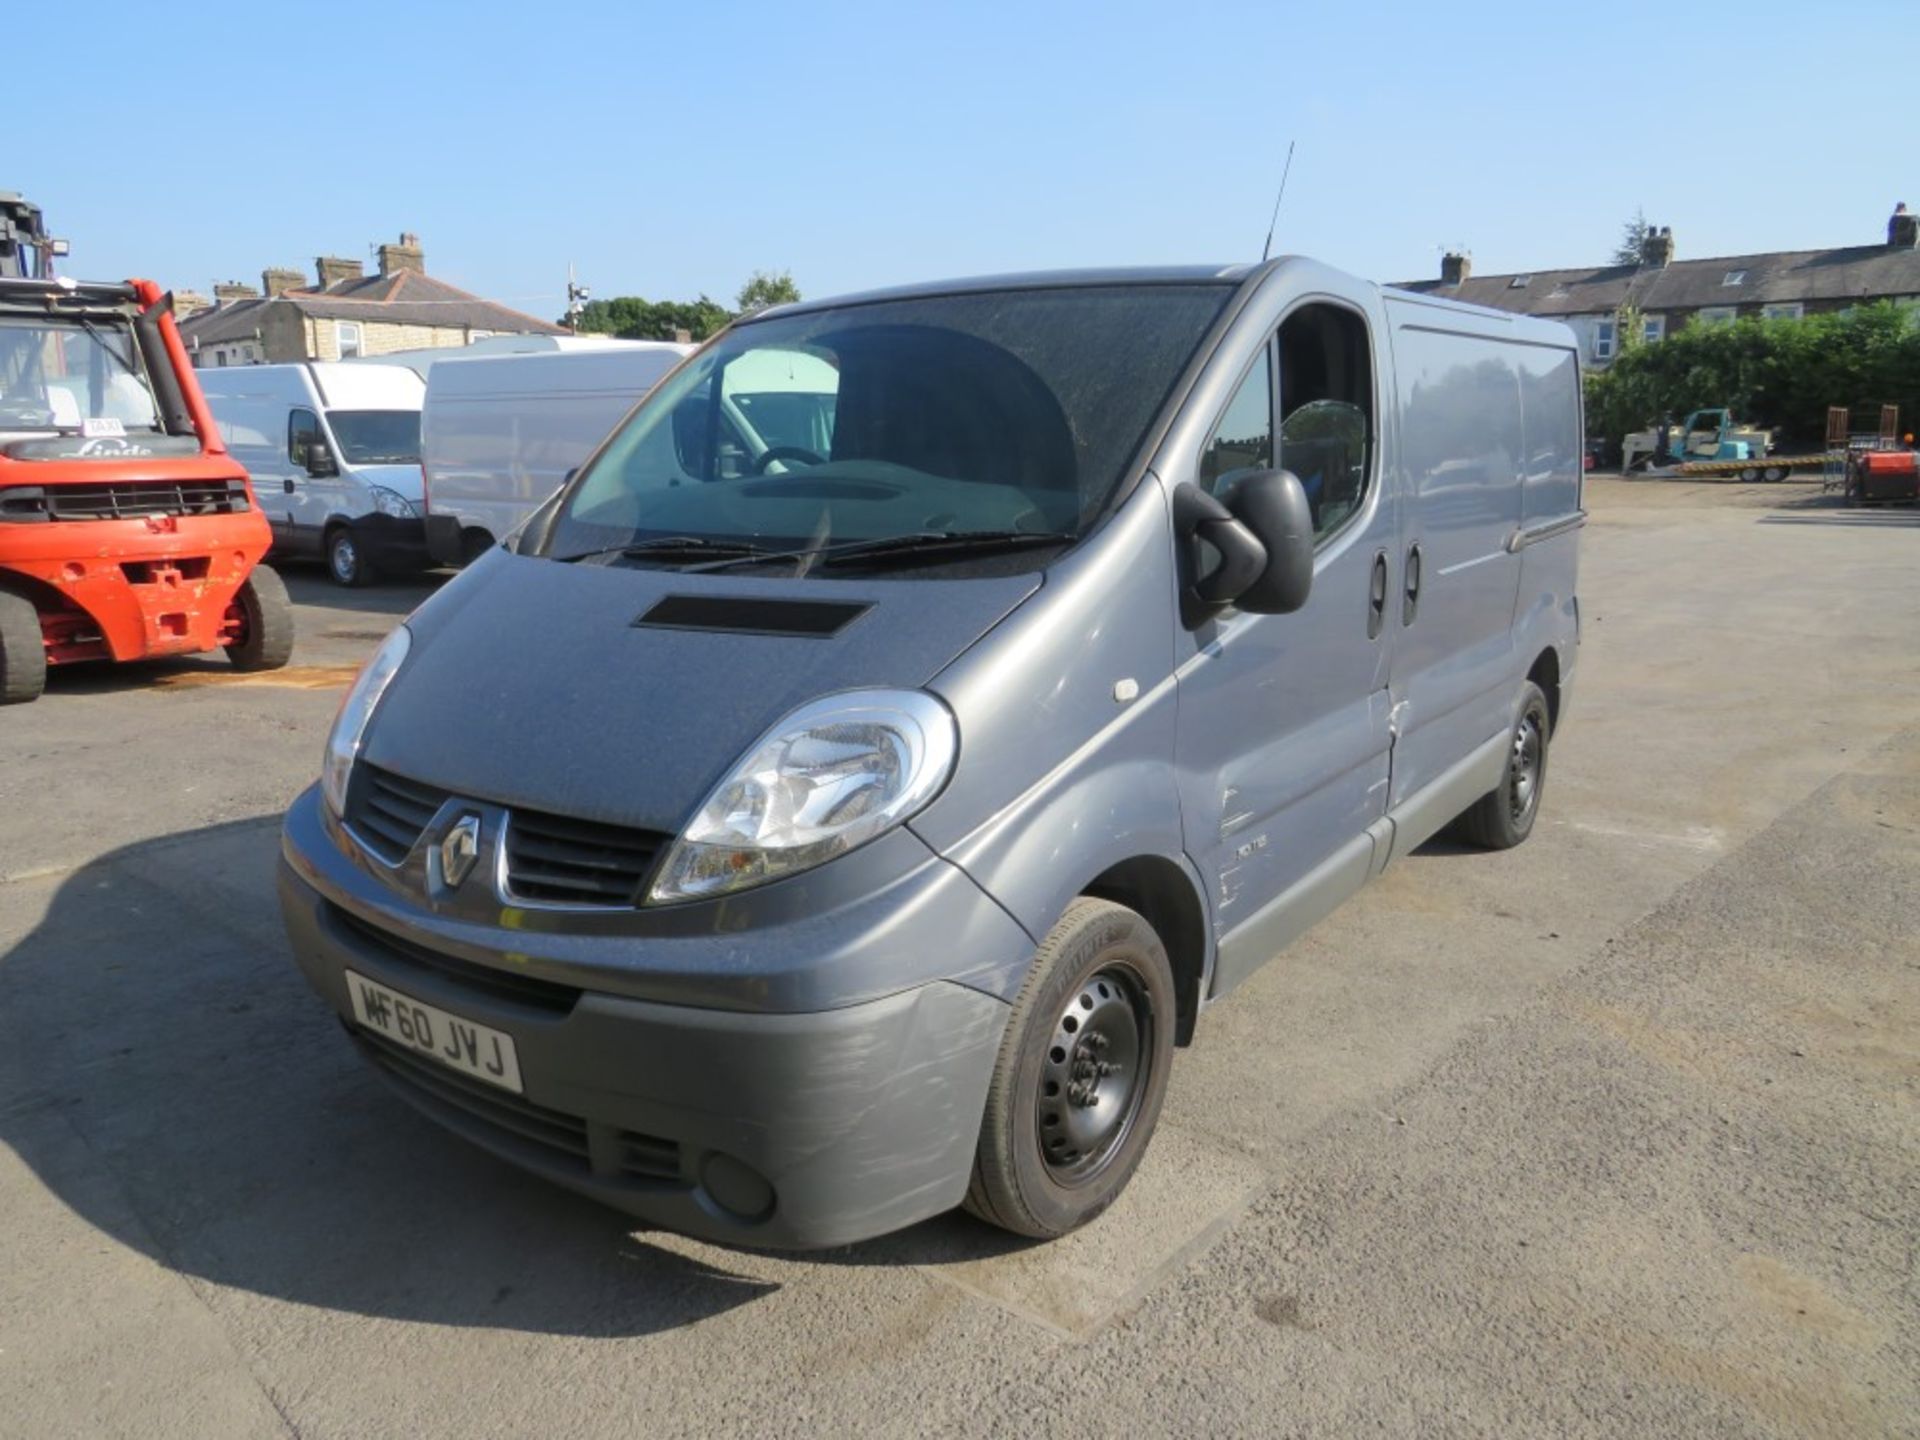 60 reg RENAULT TRAFIC SL27 DCI 115, 1ST REG 09/10, 180327M NOT WARRANTED, V5 HERE, 1 OWNER FROM - Image 2 of 7